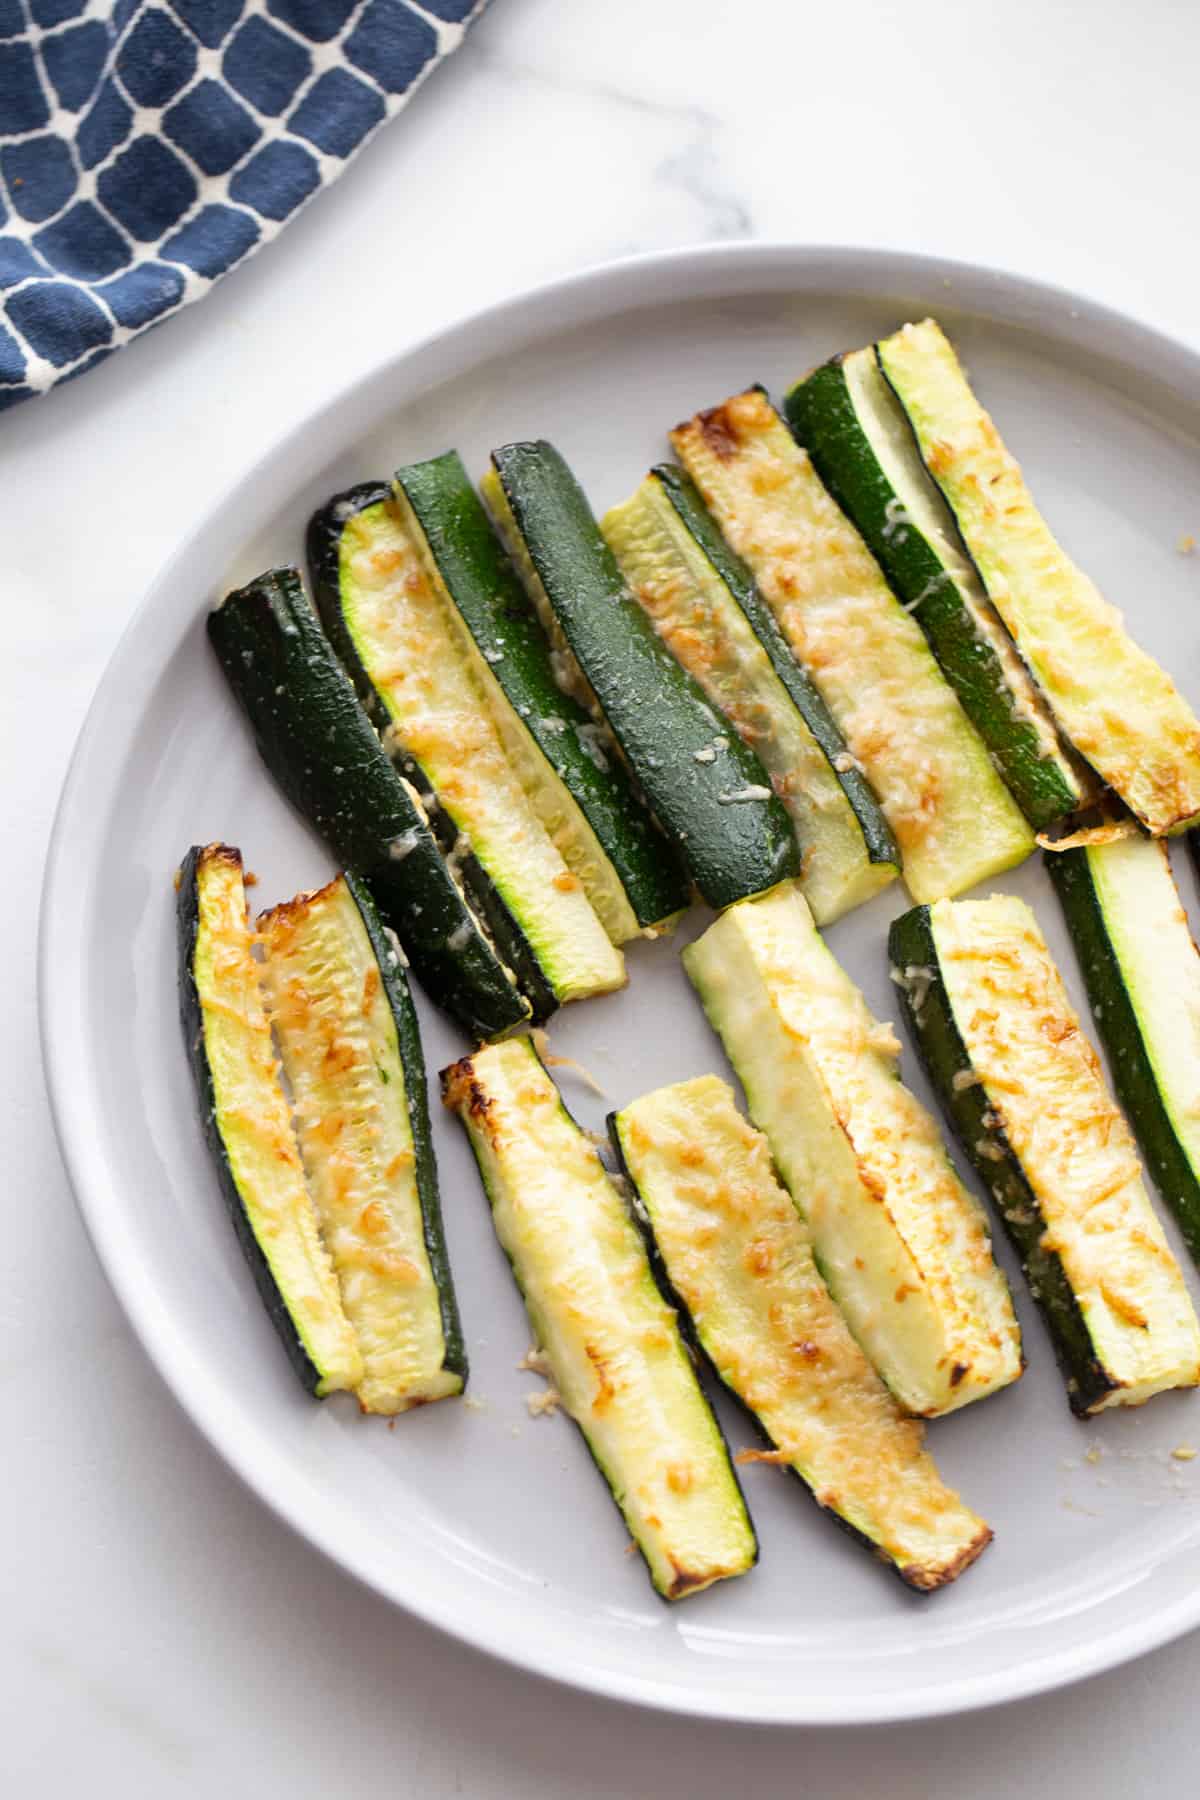 A plate of zucchini fries topped with crispy parmesan cheese